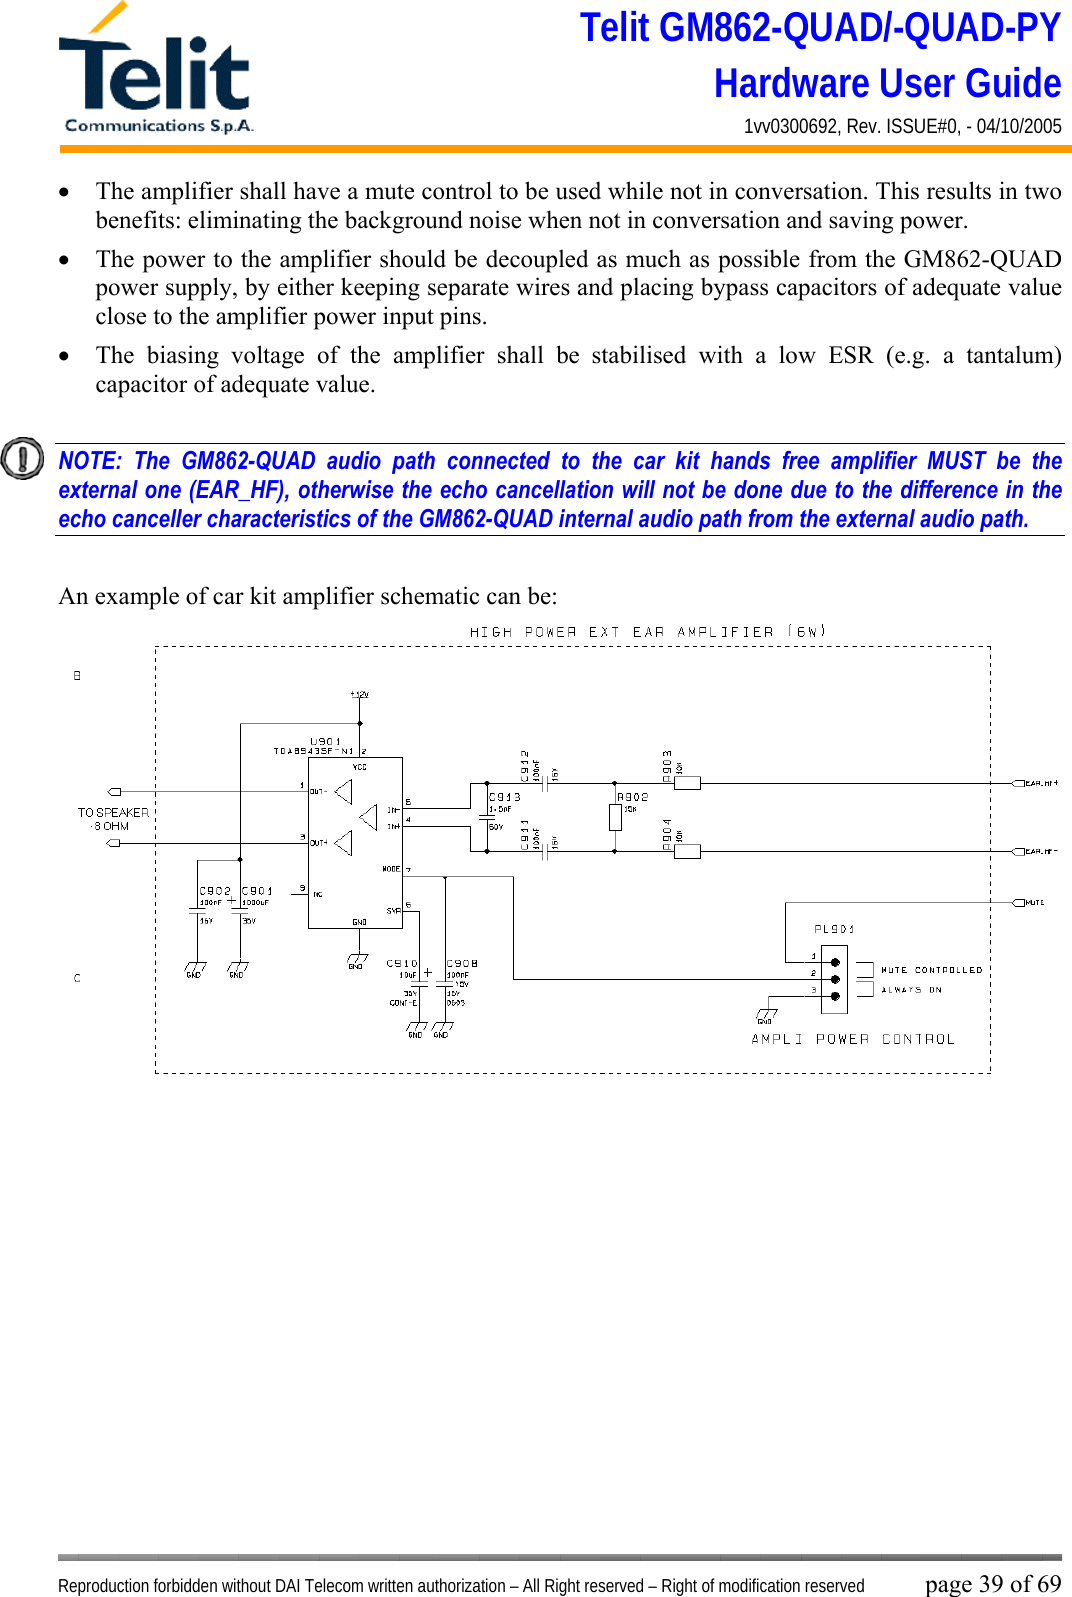 Telit GM862-QUAD/-QUAD-PY Hardware User Guide 1vv0300692, Rev. ISSUE#0, - 04/10/2005   Reproduction forbidden without DAI Telecom written authorization – All Right reserved – Right of modification reserved page 39 of 69 •  The amplifier shall have a mute control to be used while not in conversation. This results in two benefits: eliminating the background noise when not in conversation and saving power. •  The power to the amplifier should be decoupled as much as possible from the GM862-QUAD power supply, by either keeping separate wires and placing bypass capacitors of adequate value close to the amplifier power input pins. •  The biasing voltage of the amplifier shall be stabilised with a low ESR (e.g. a tantalum) capacitor of adequate value.   NOTE: The GM862-QUAD audio path connected to the car kit hands free amplifier MUST be the external one (EAR_HF), otherwise the echo cancellation will not be done due to the difference in the echo canceller characteristics of the GM862-QUAD internal audio path from the external audio path.    An example of car kit amplifier schematic can be:   